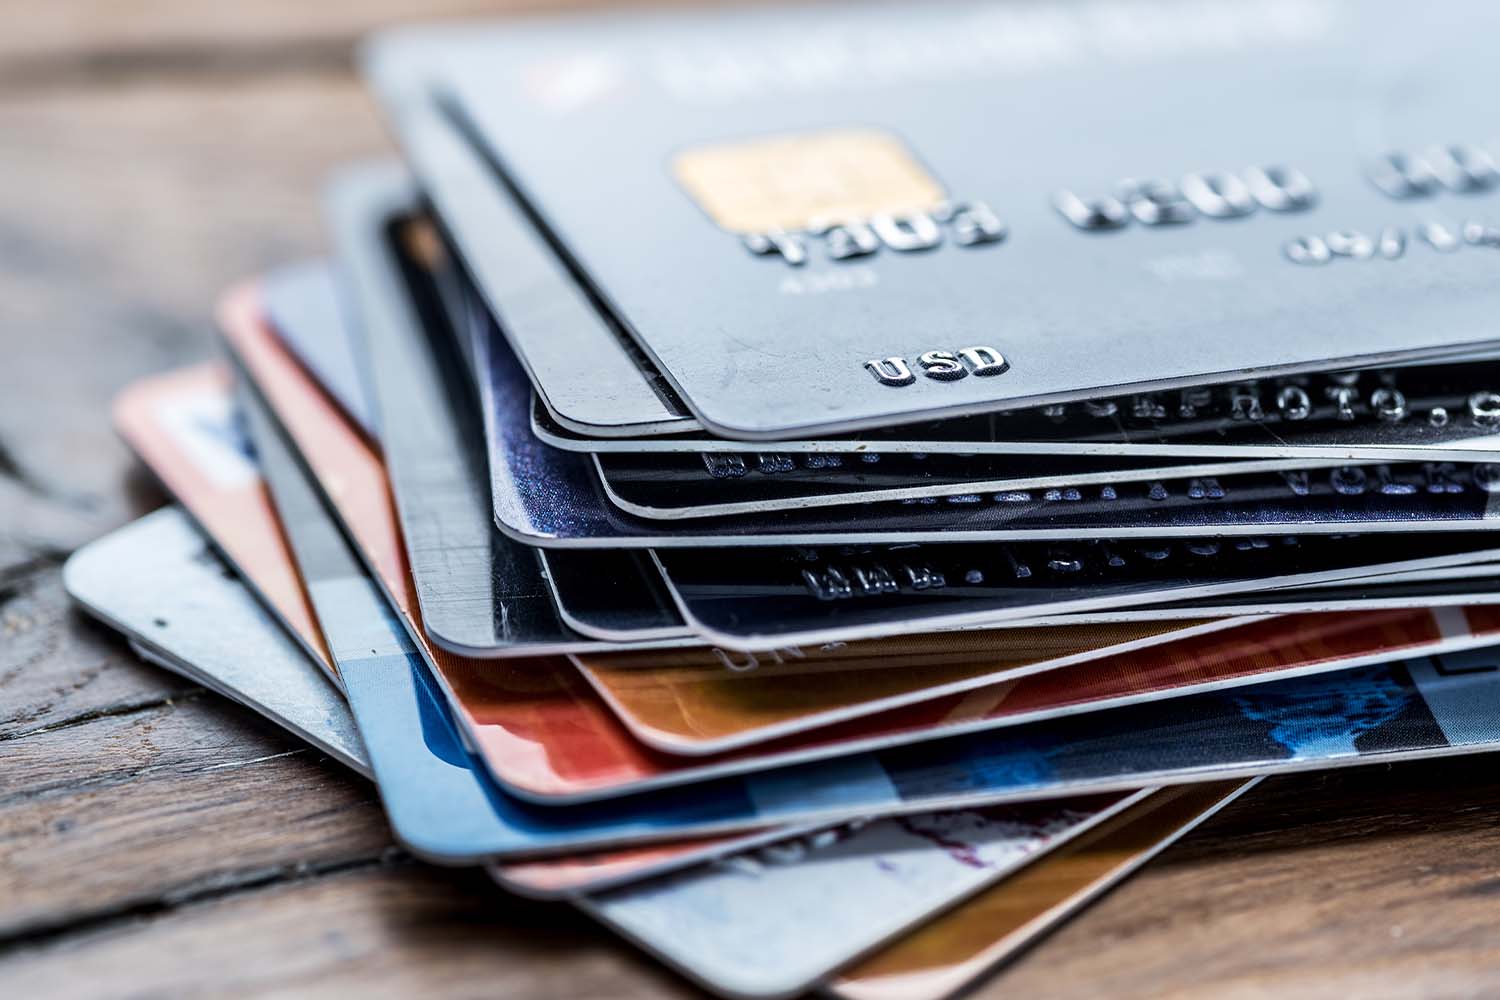 How To Store Credit Cards